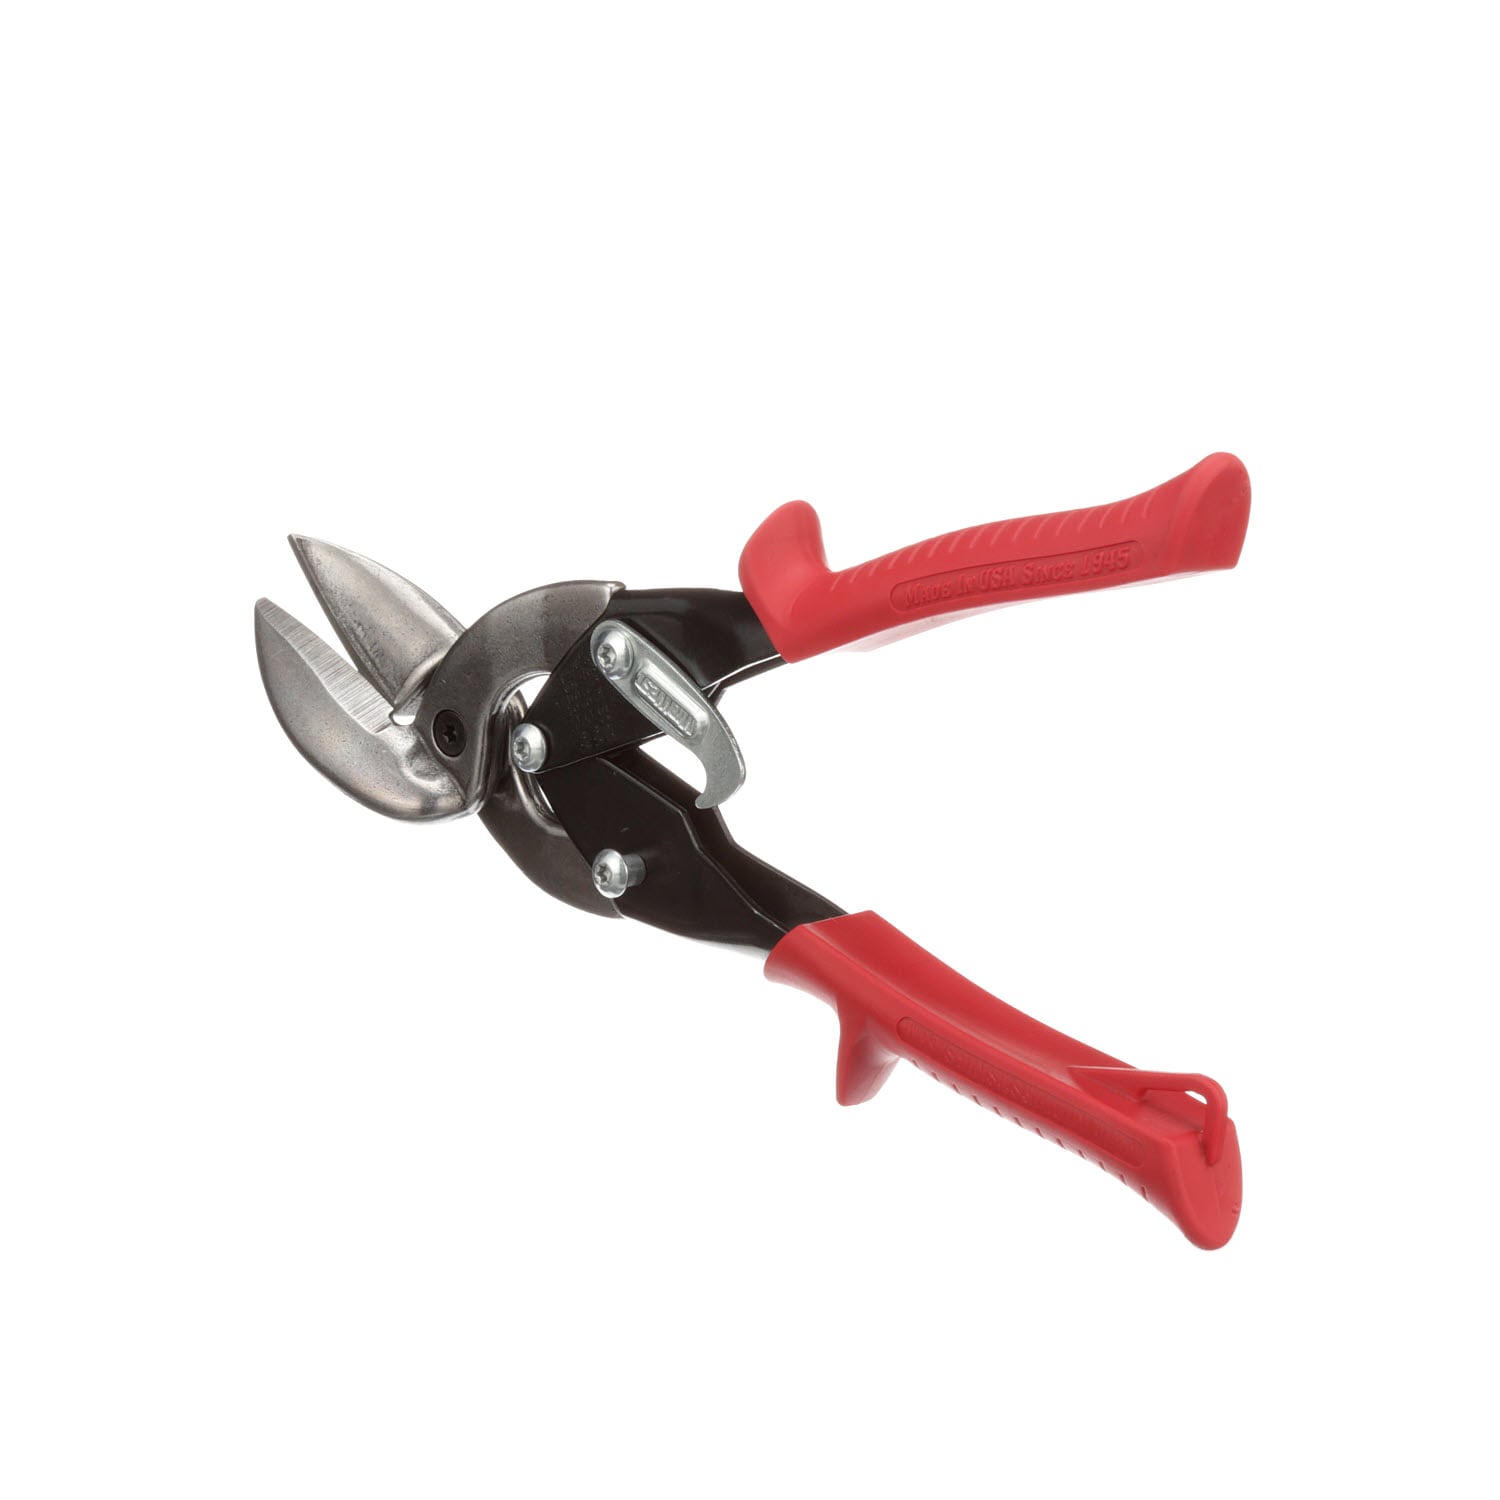 Midwest Snips Offset AVIAZIONE Forbice a sinistra MWT-6510L Stagno Snips Nuove UK STOCK 